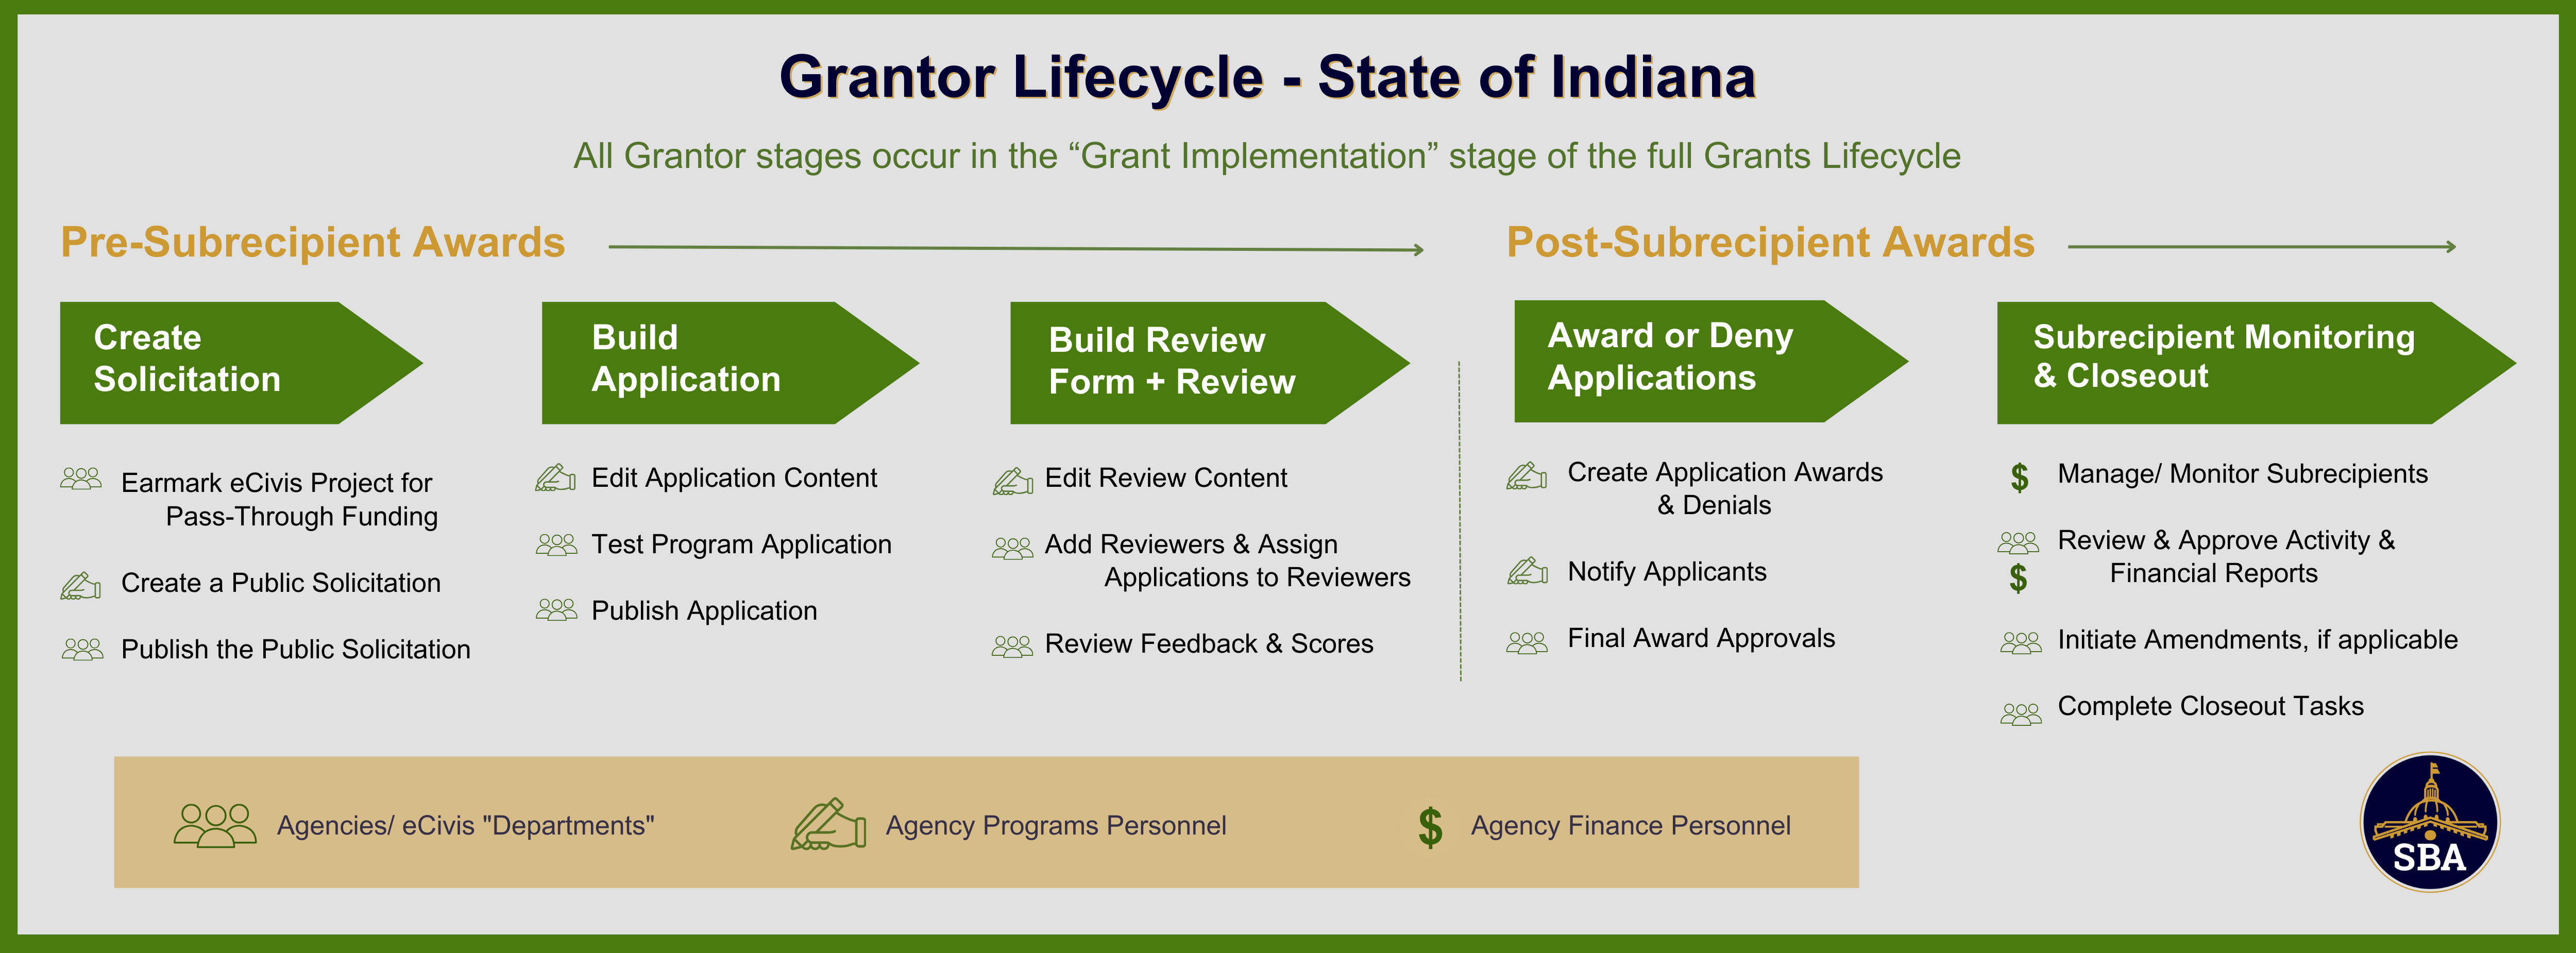 This graphic provides a visual overview of the grants lifecycle at the State of Indiana specific to when agencies serve as a Grantor. An agency is designated a Grantor if a grant will be used for pass-through funding to Subrecipients.  The graphic showcases the Grantor stages in eCivis and the specific processes and roles involved. These stages include creating a solicitation, building an application, building a review form for assigned reviewers to score & provide feedback to applicants, awarding or denying Subrecipients, Subrecipient Monitoring, & finally Closeout. 